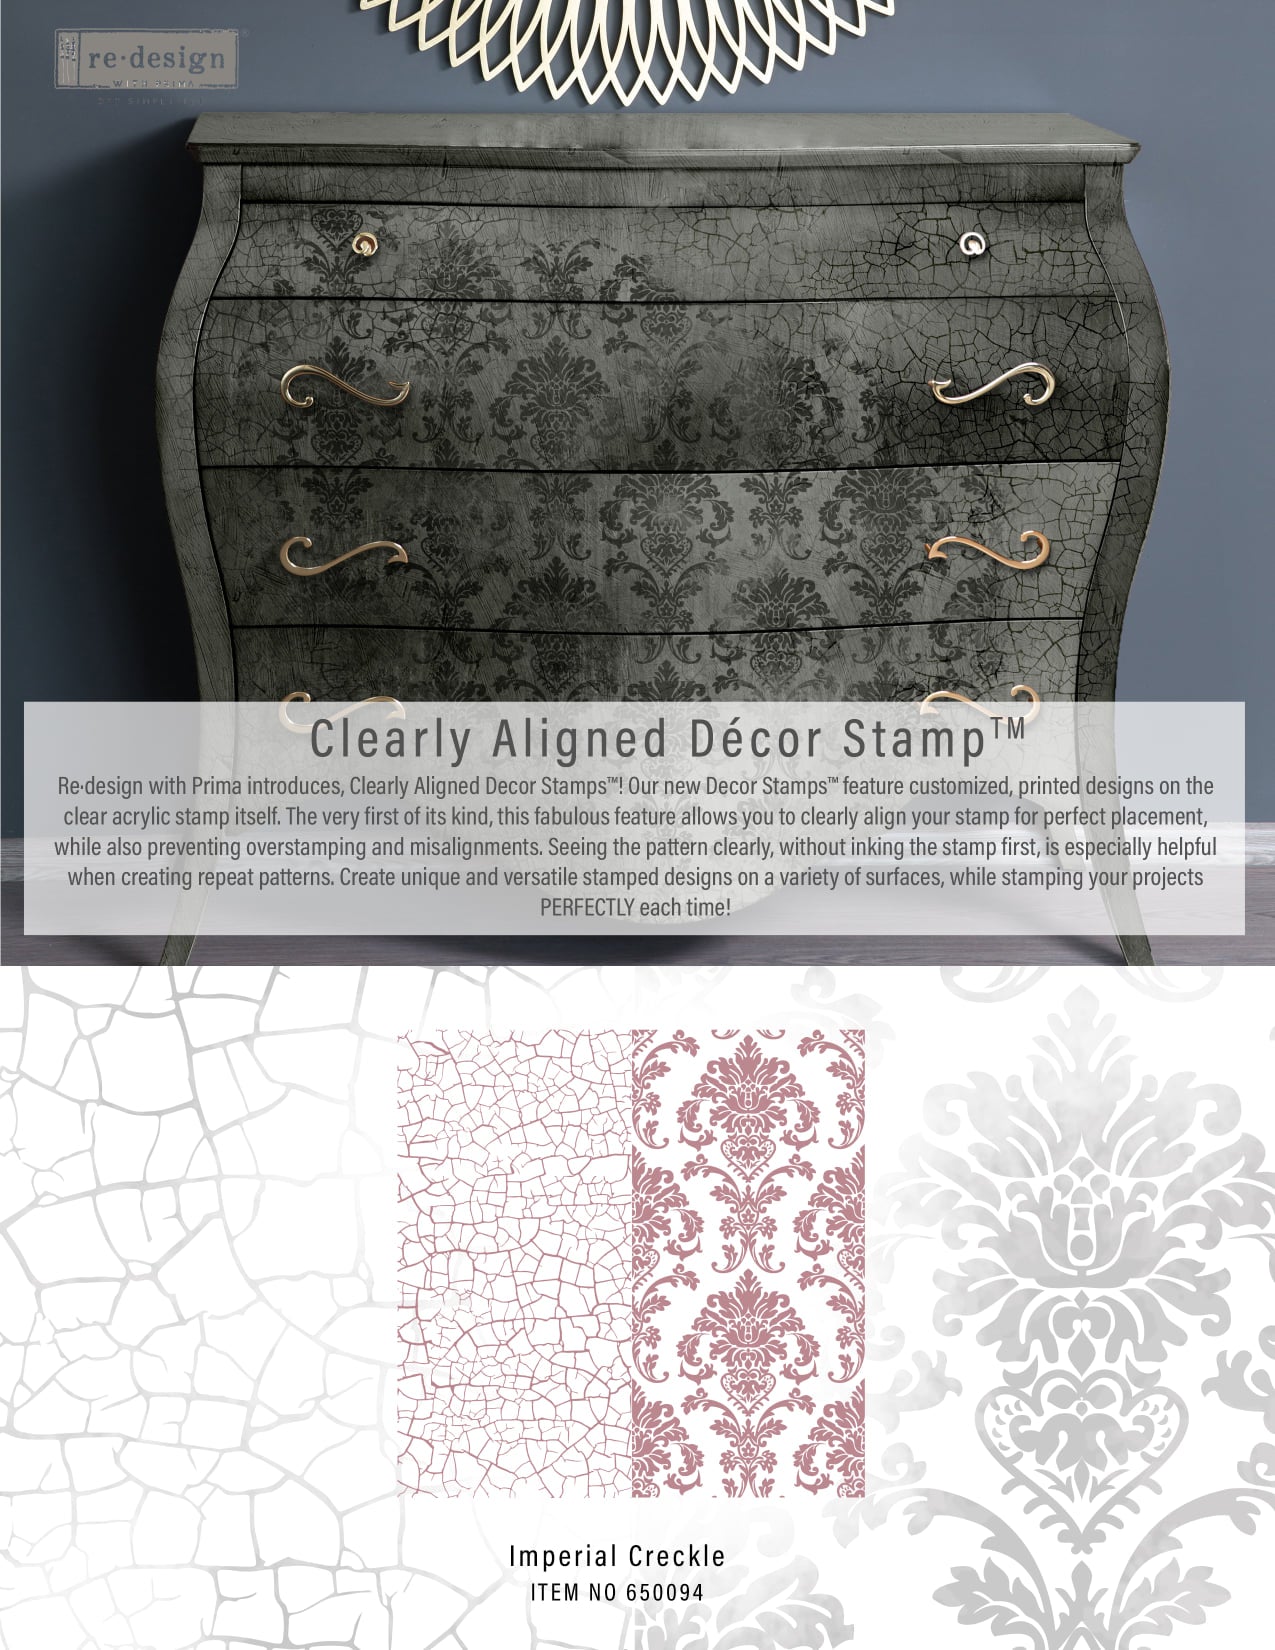 Redesign Decor Stamp IMPERIAL CRACKLE | redesign-decor-stamp-imperial-crackle | Redesign With Prima